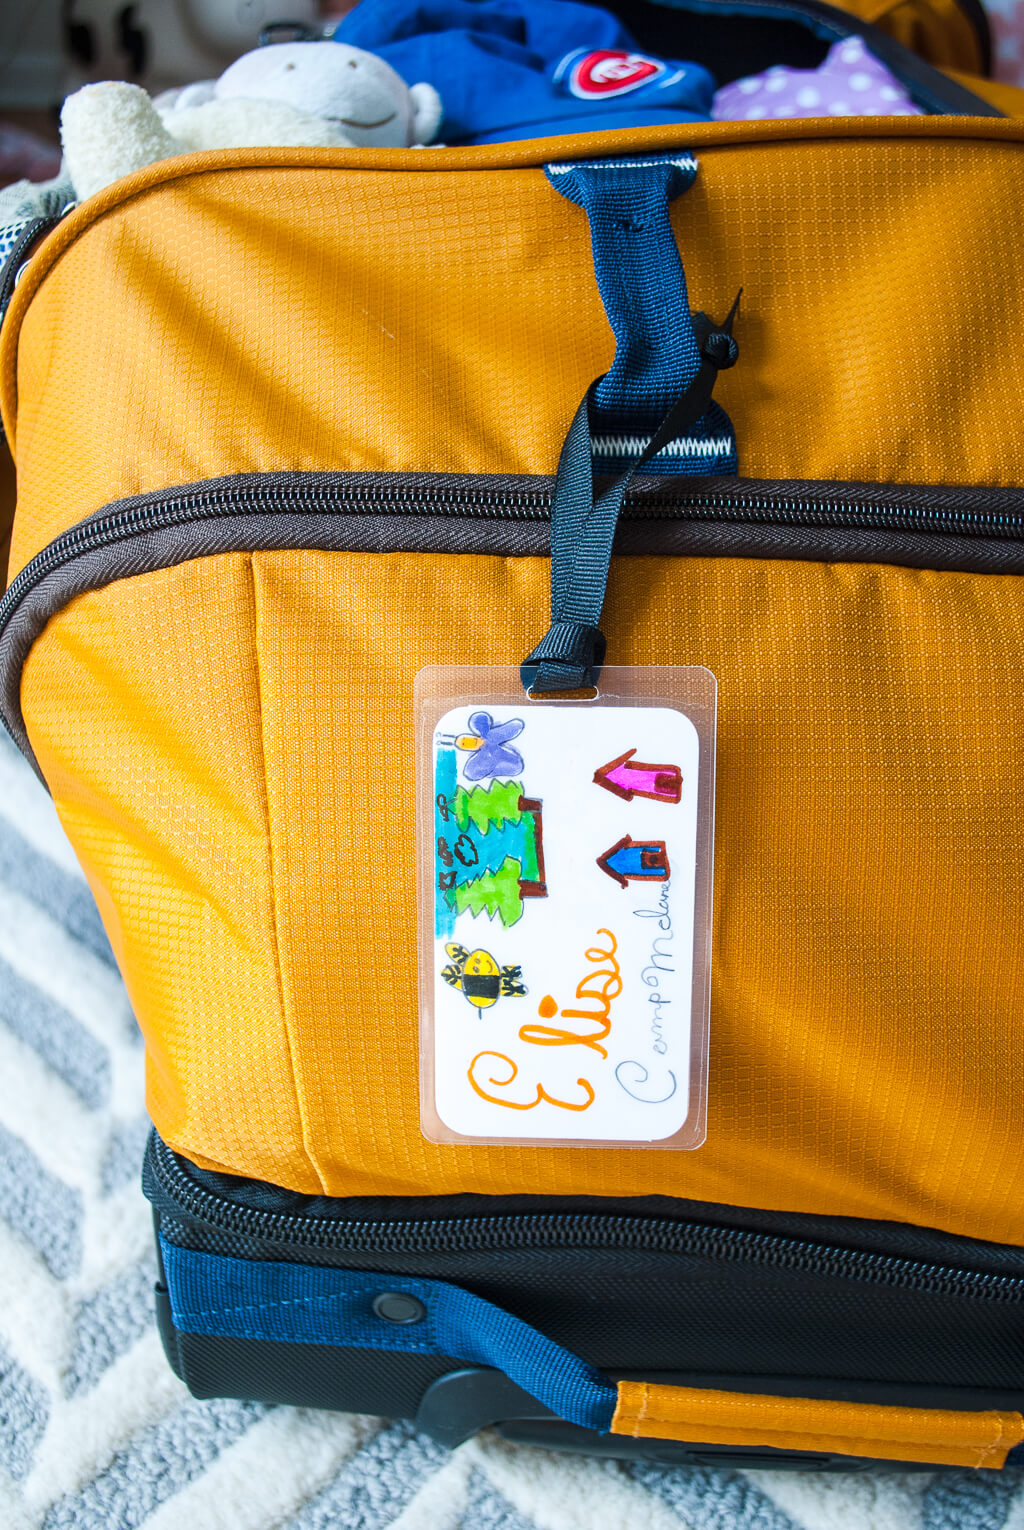 Easy DIY summer camp luggage tag. Super cute and less than $2 to make in under 30 minutes!